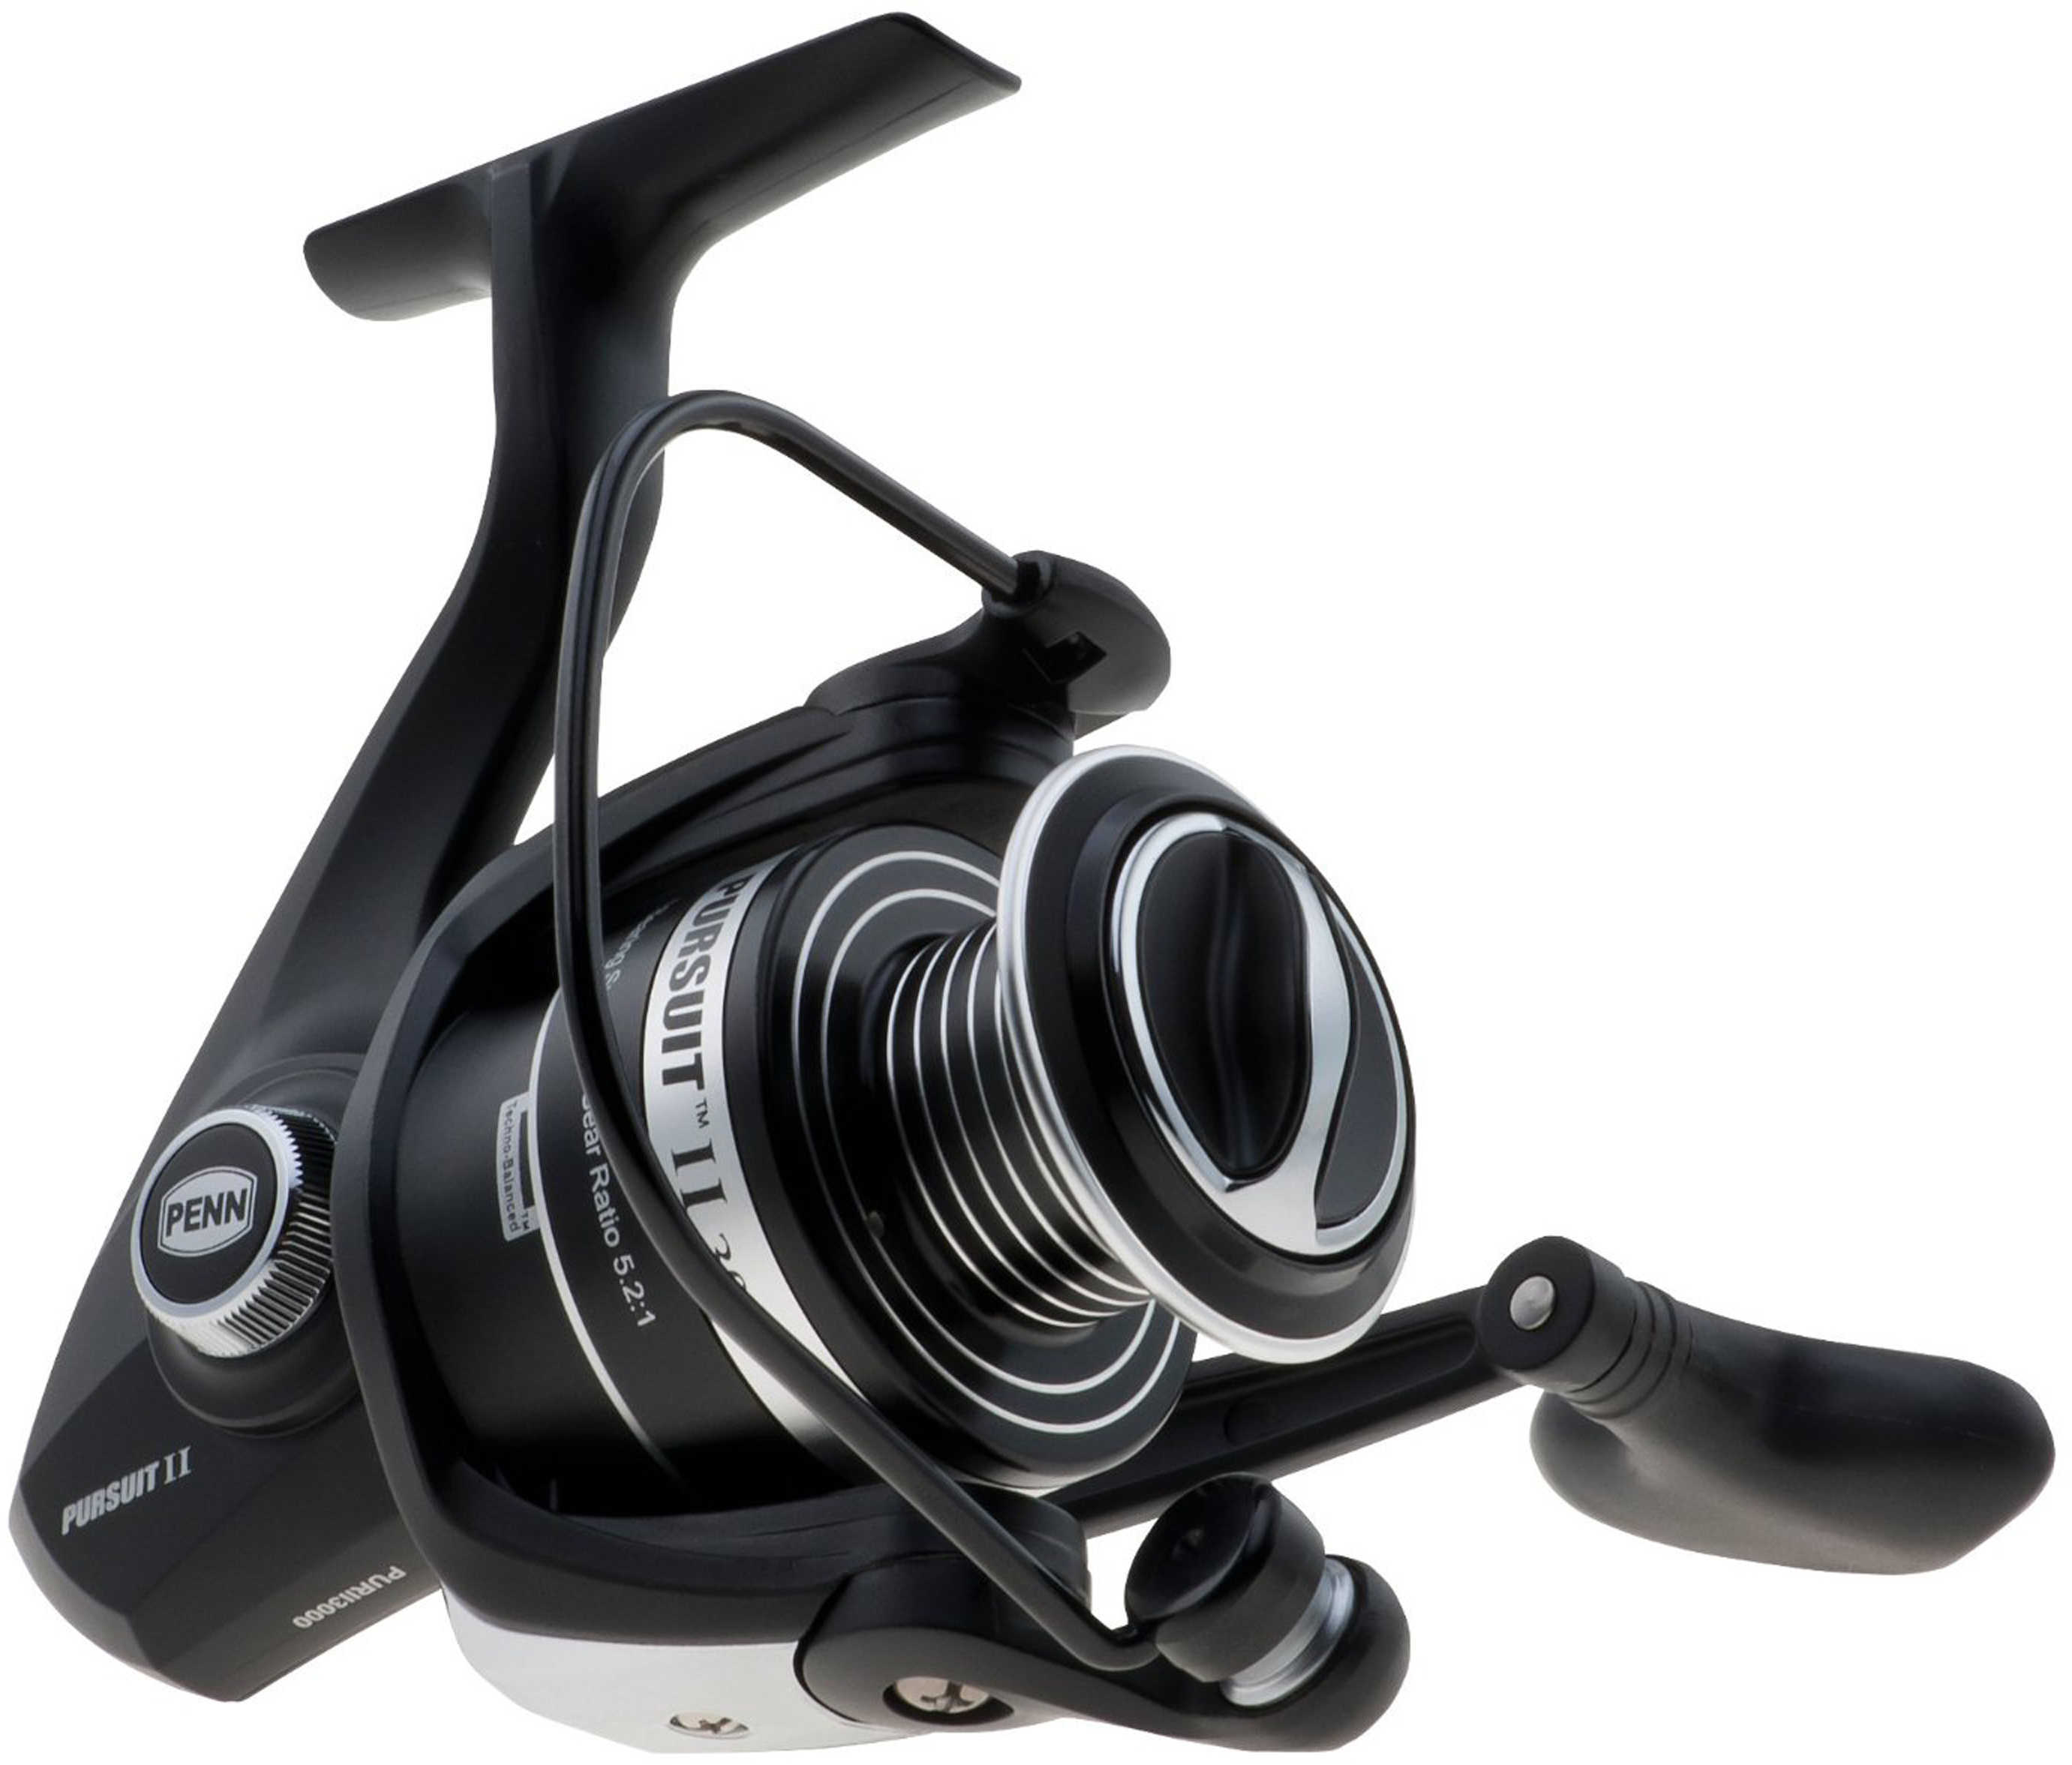 Penn Pursuit II Spin Reel 3000, Boxed 1292956